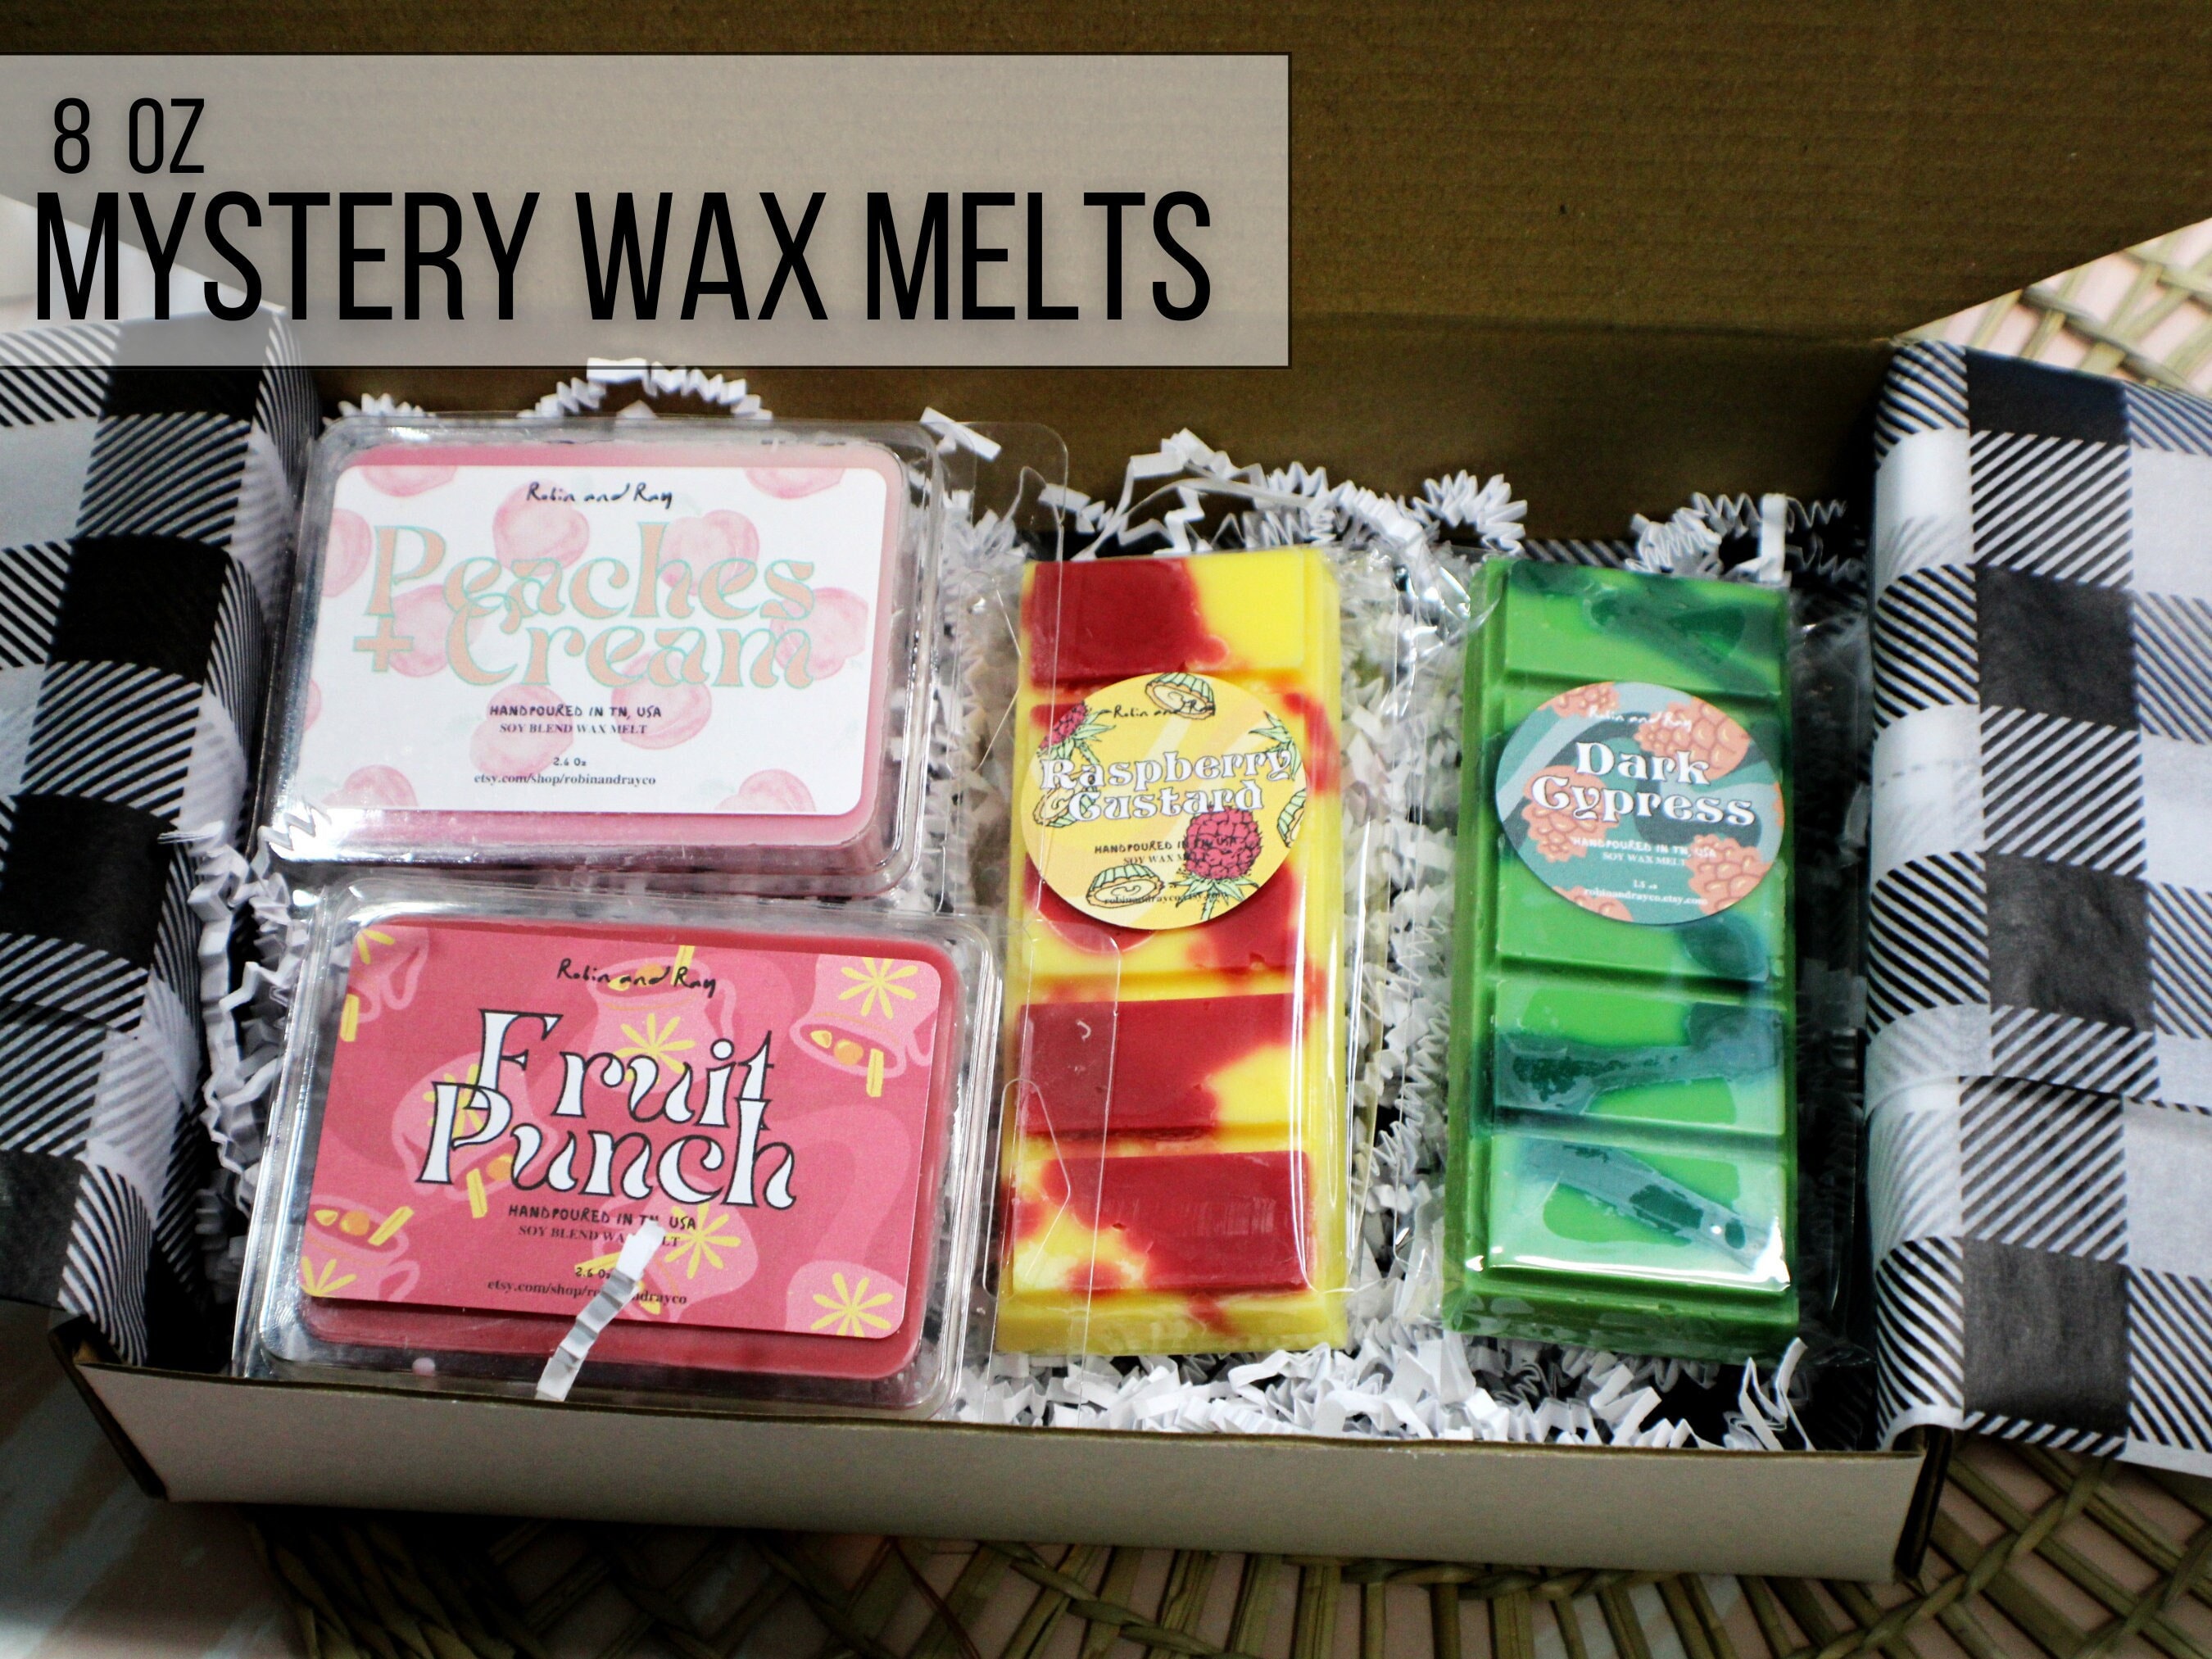 Delightful Scented Food-shaped Wax Melts Gift Box Perfect for